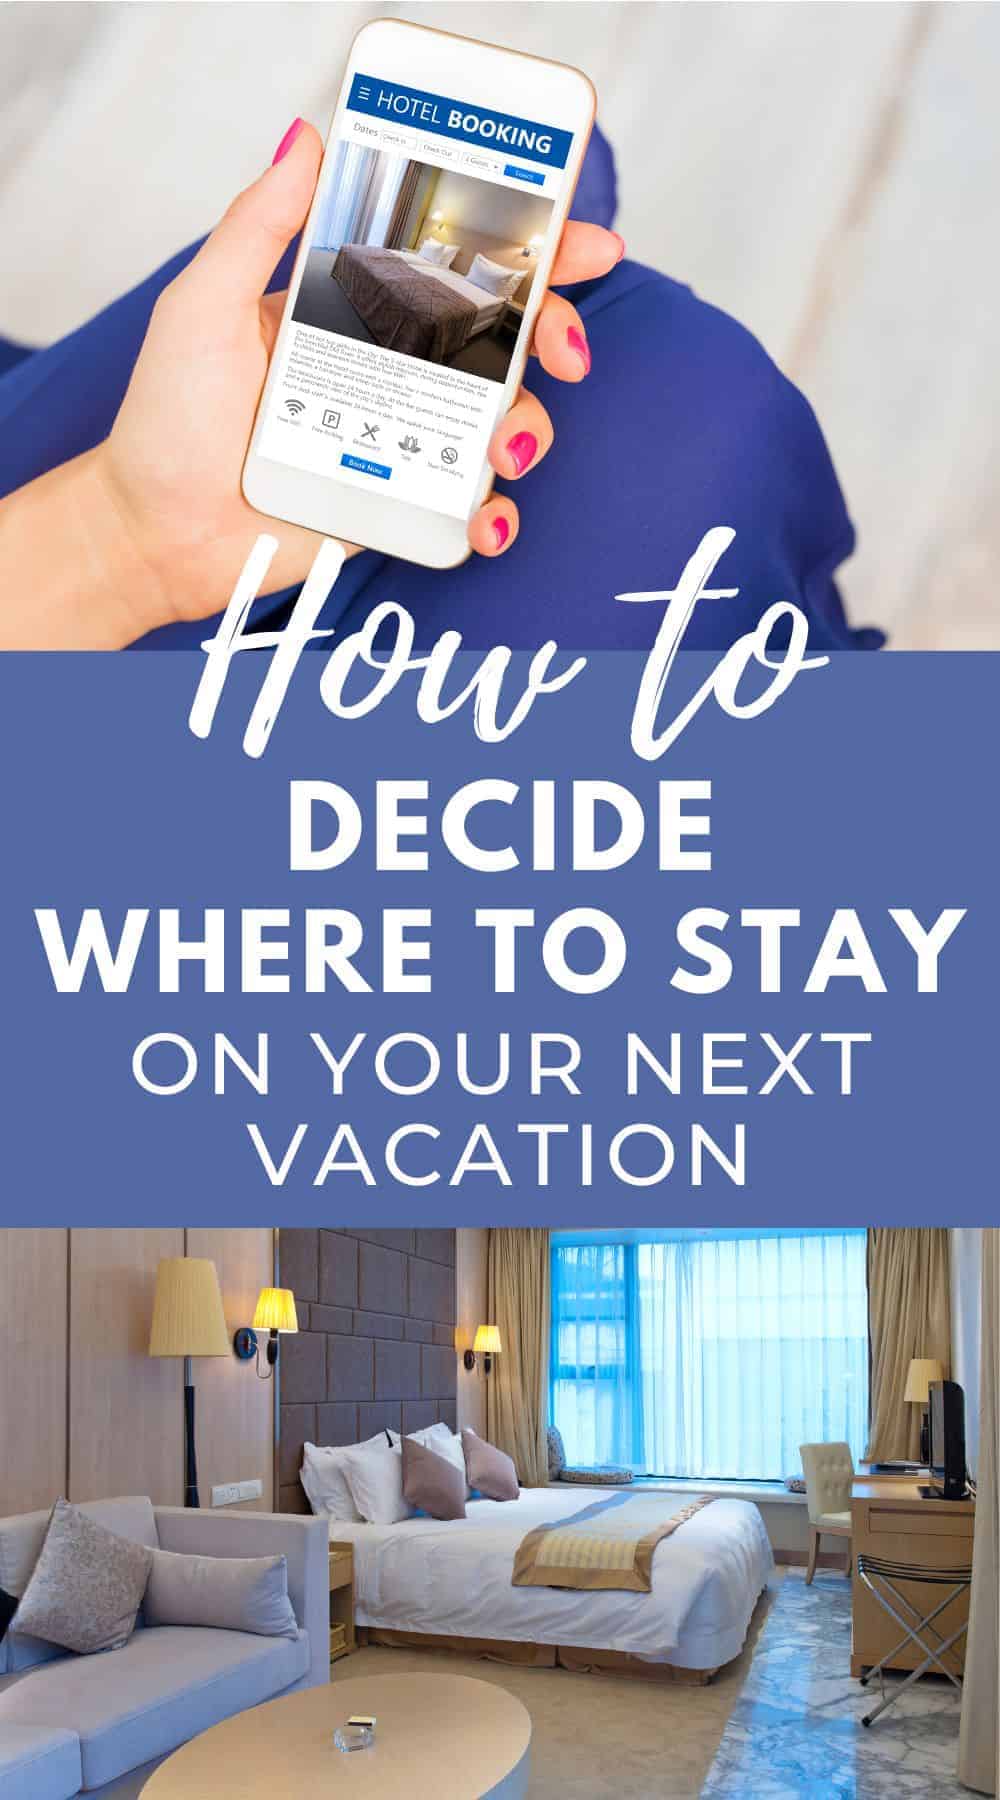 Pinterest image with two photos, one of a hotel room and the other of a hand holding a phone that says "hotel booking" on the screen. The text on the pin image says, "How to decide where to stay on your next vacation."